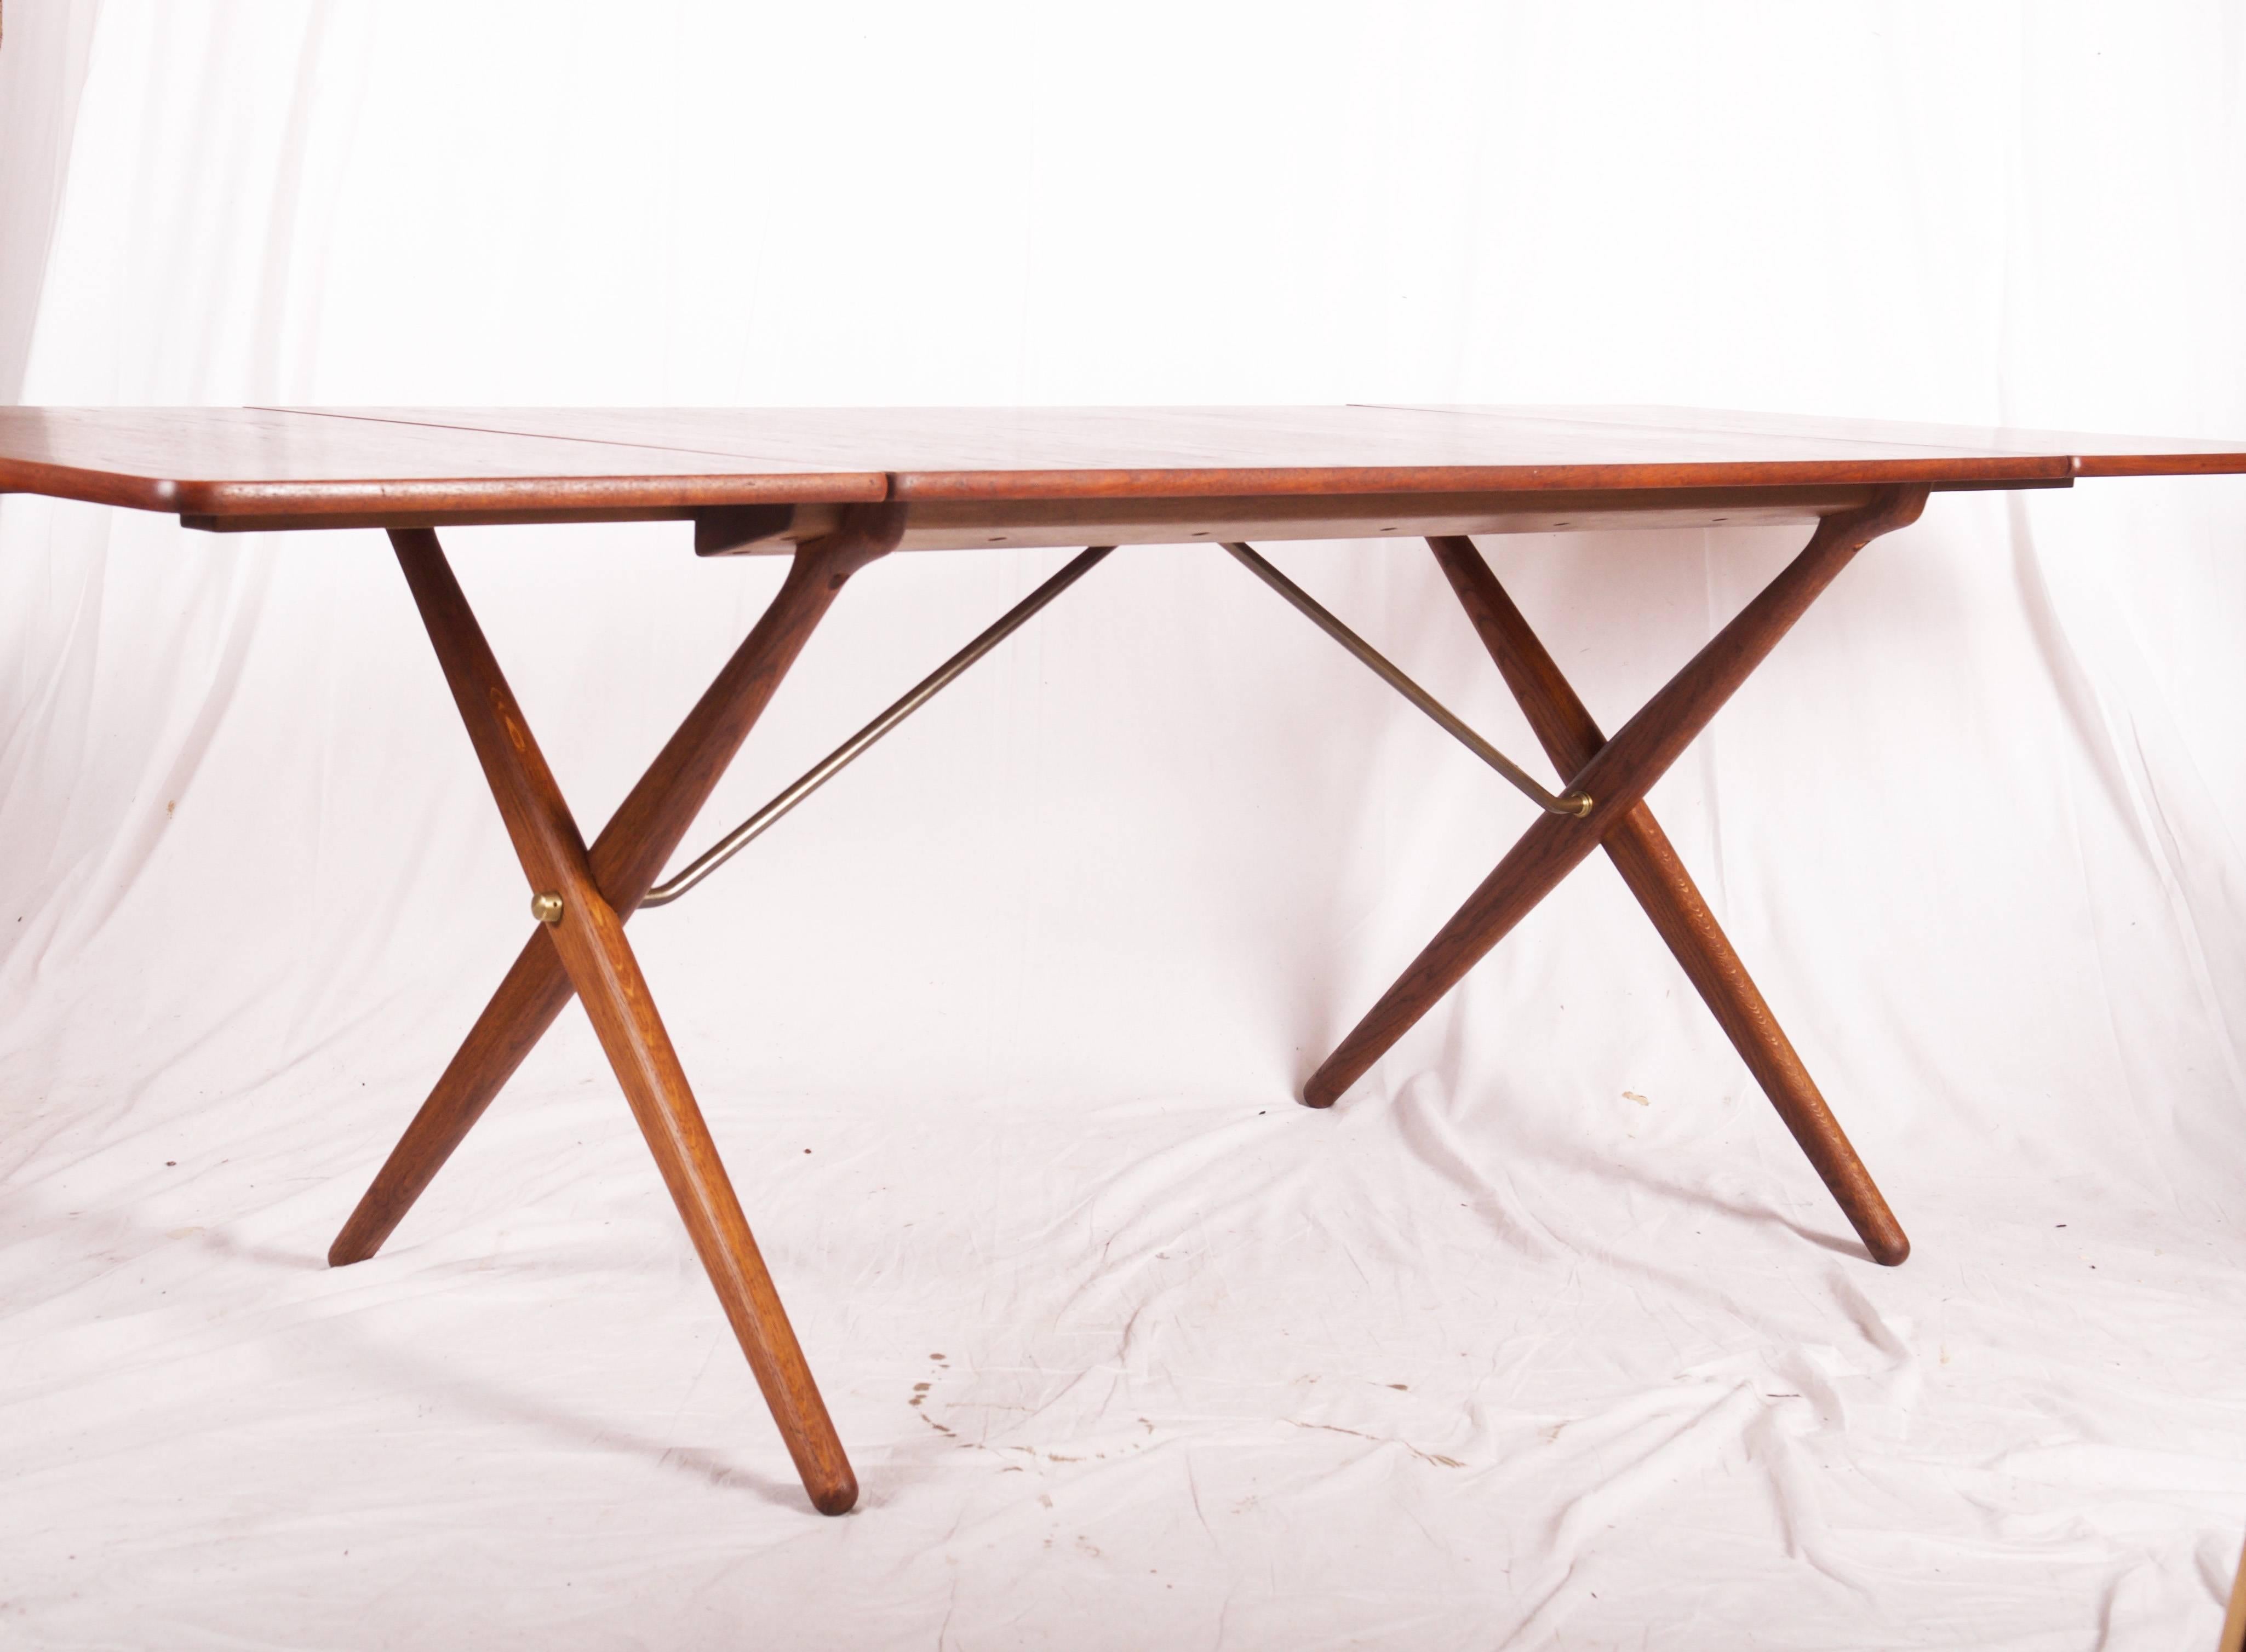 Dining table by Hans J. Wegner designed in 1952 and manufactured by Andreas Tuck, Model AT-309. Mention in catalog 1952. Cross-legs in solid oak with brass trust base. Tabletop in teak. (Max. length 228 cm. about 90